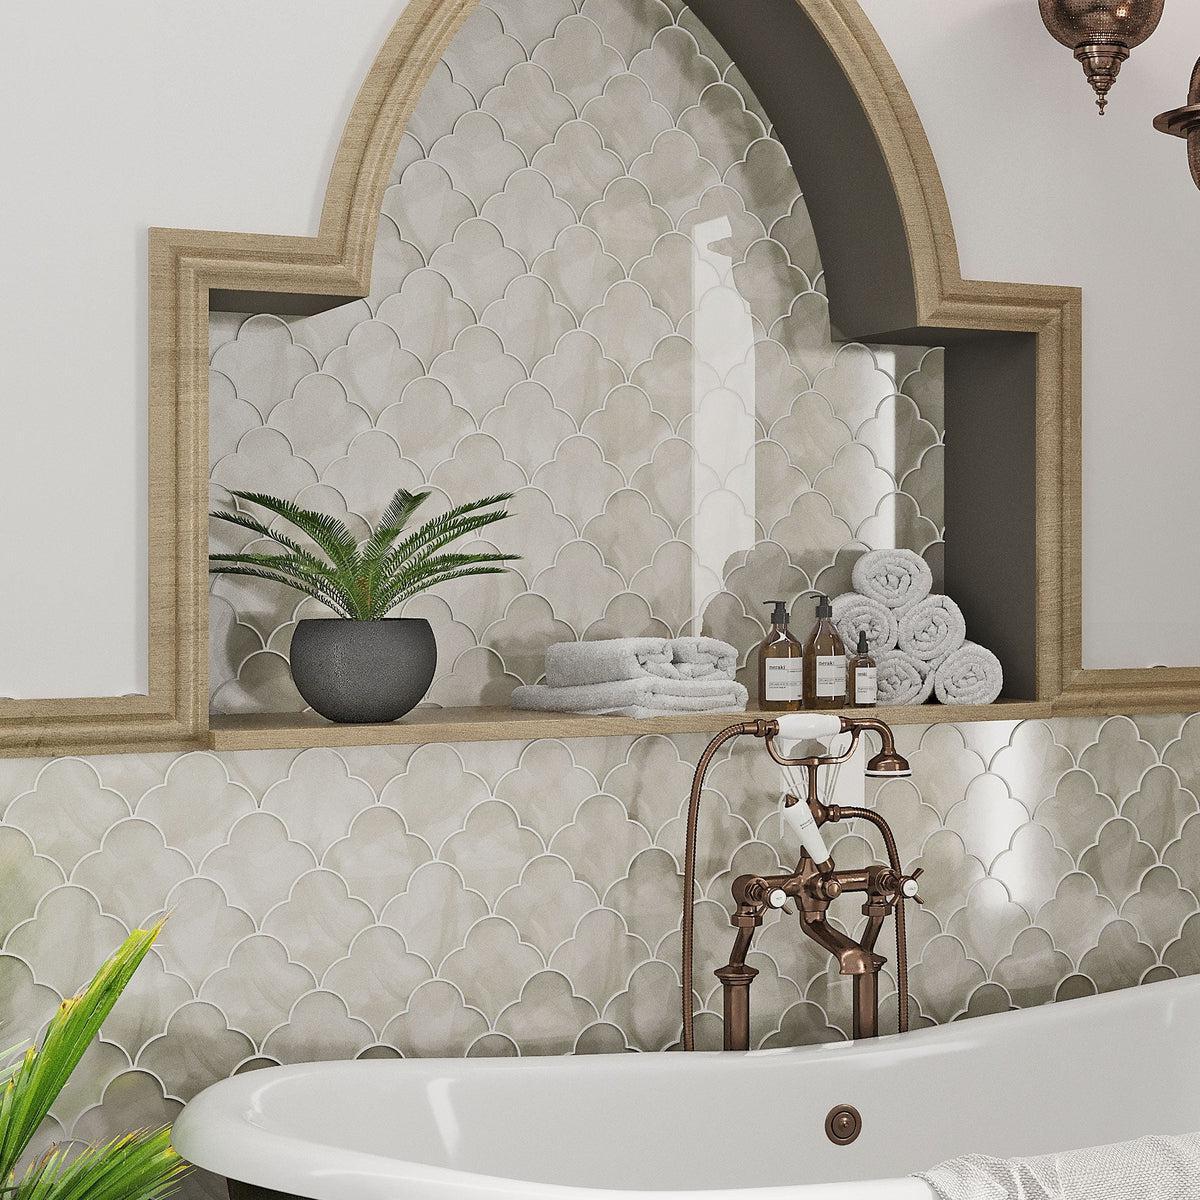 Moroccan style bathroom wall with glass tile